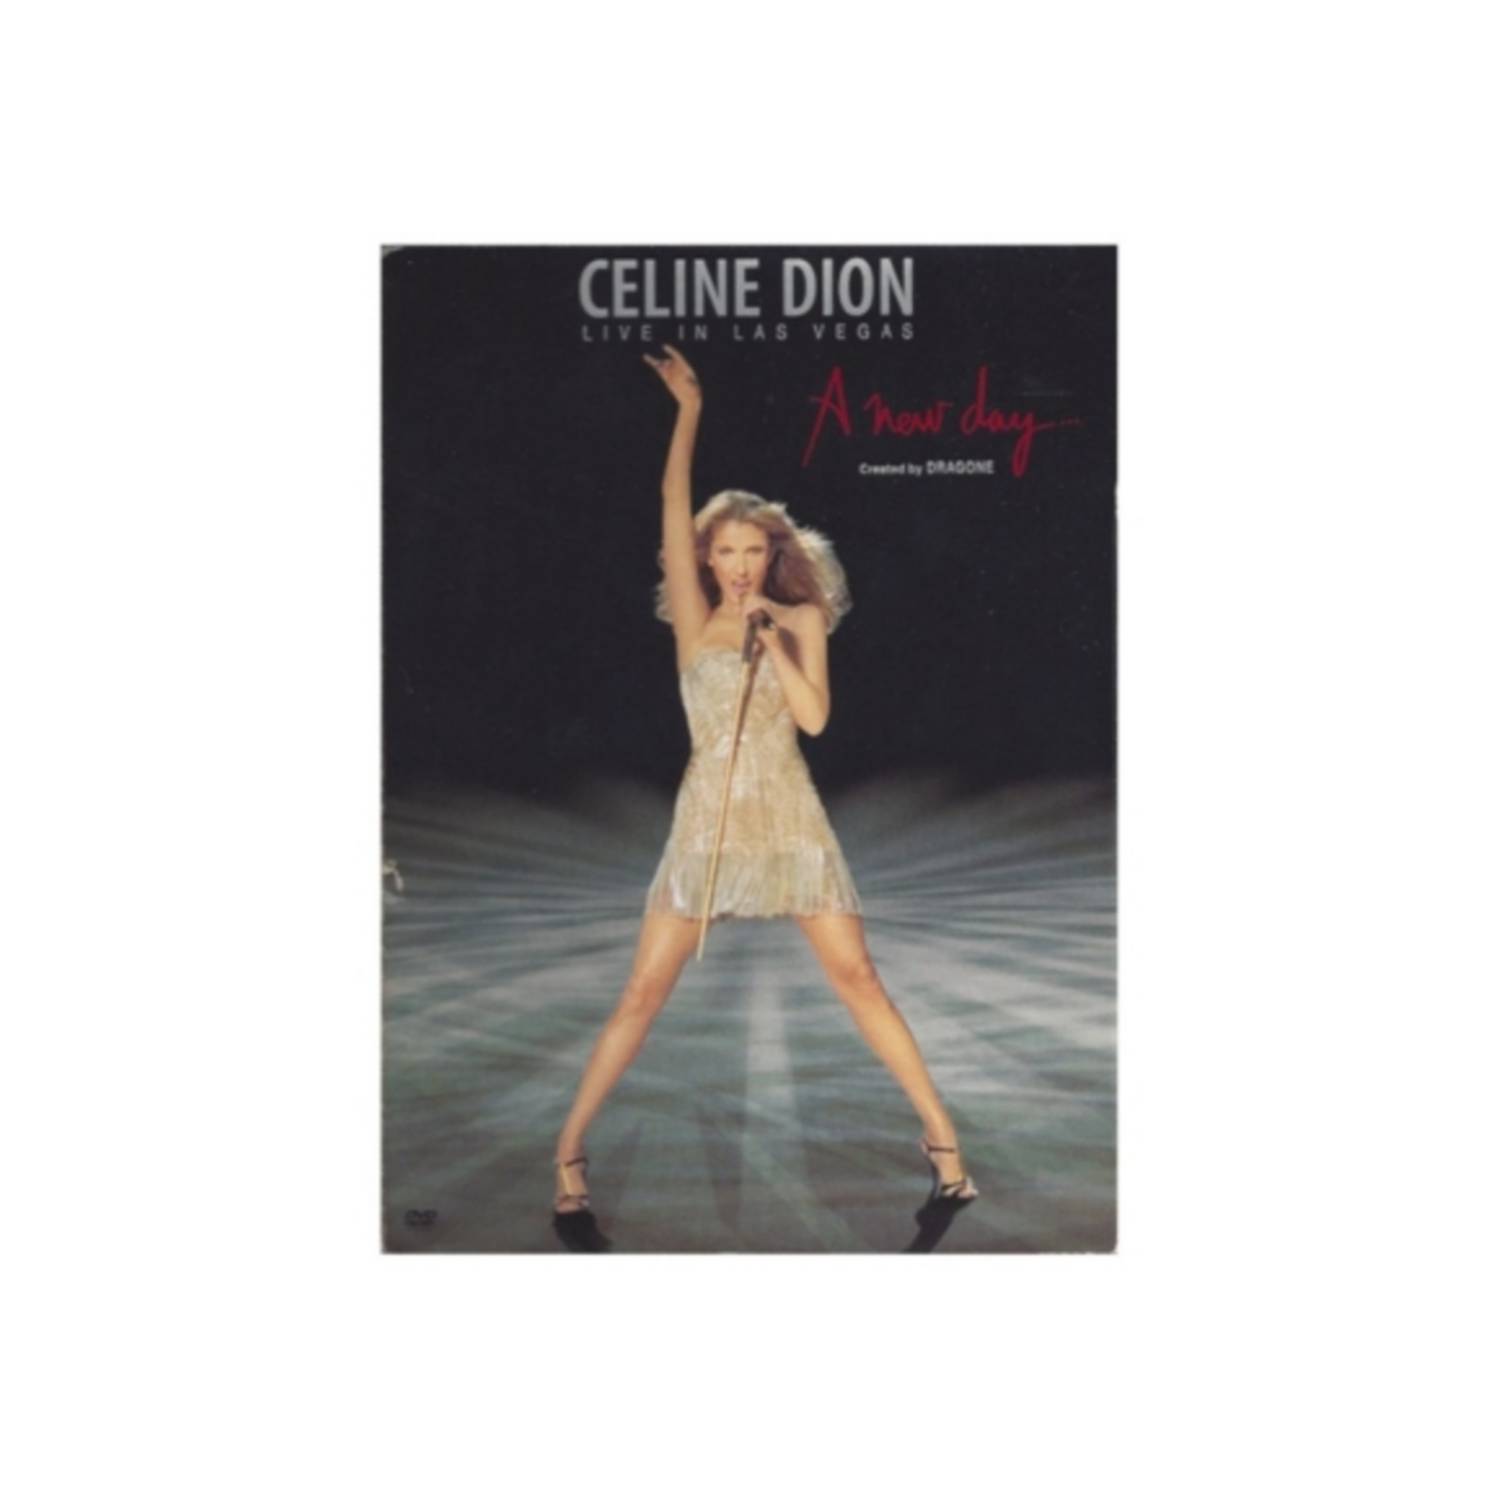 HITWAY MUSIC CELINE DION - LIVE IN LAS VEGAS A NEW DAY DVD HITWAY